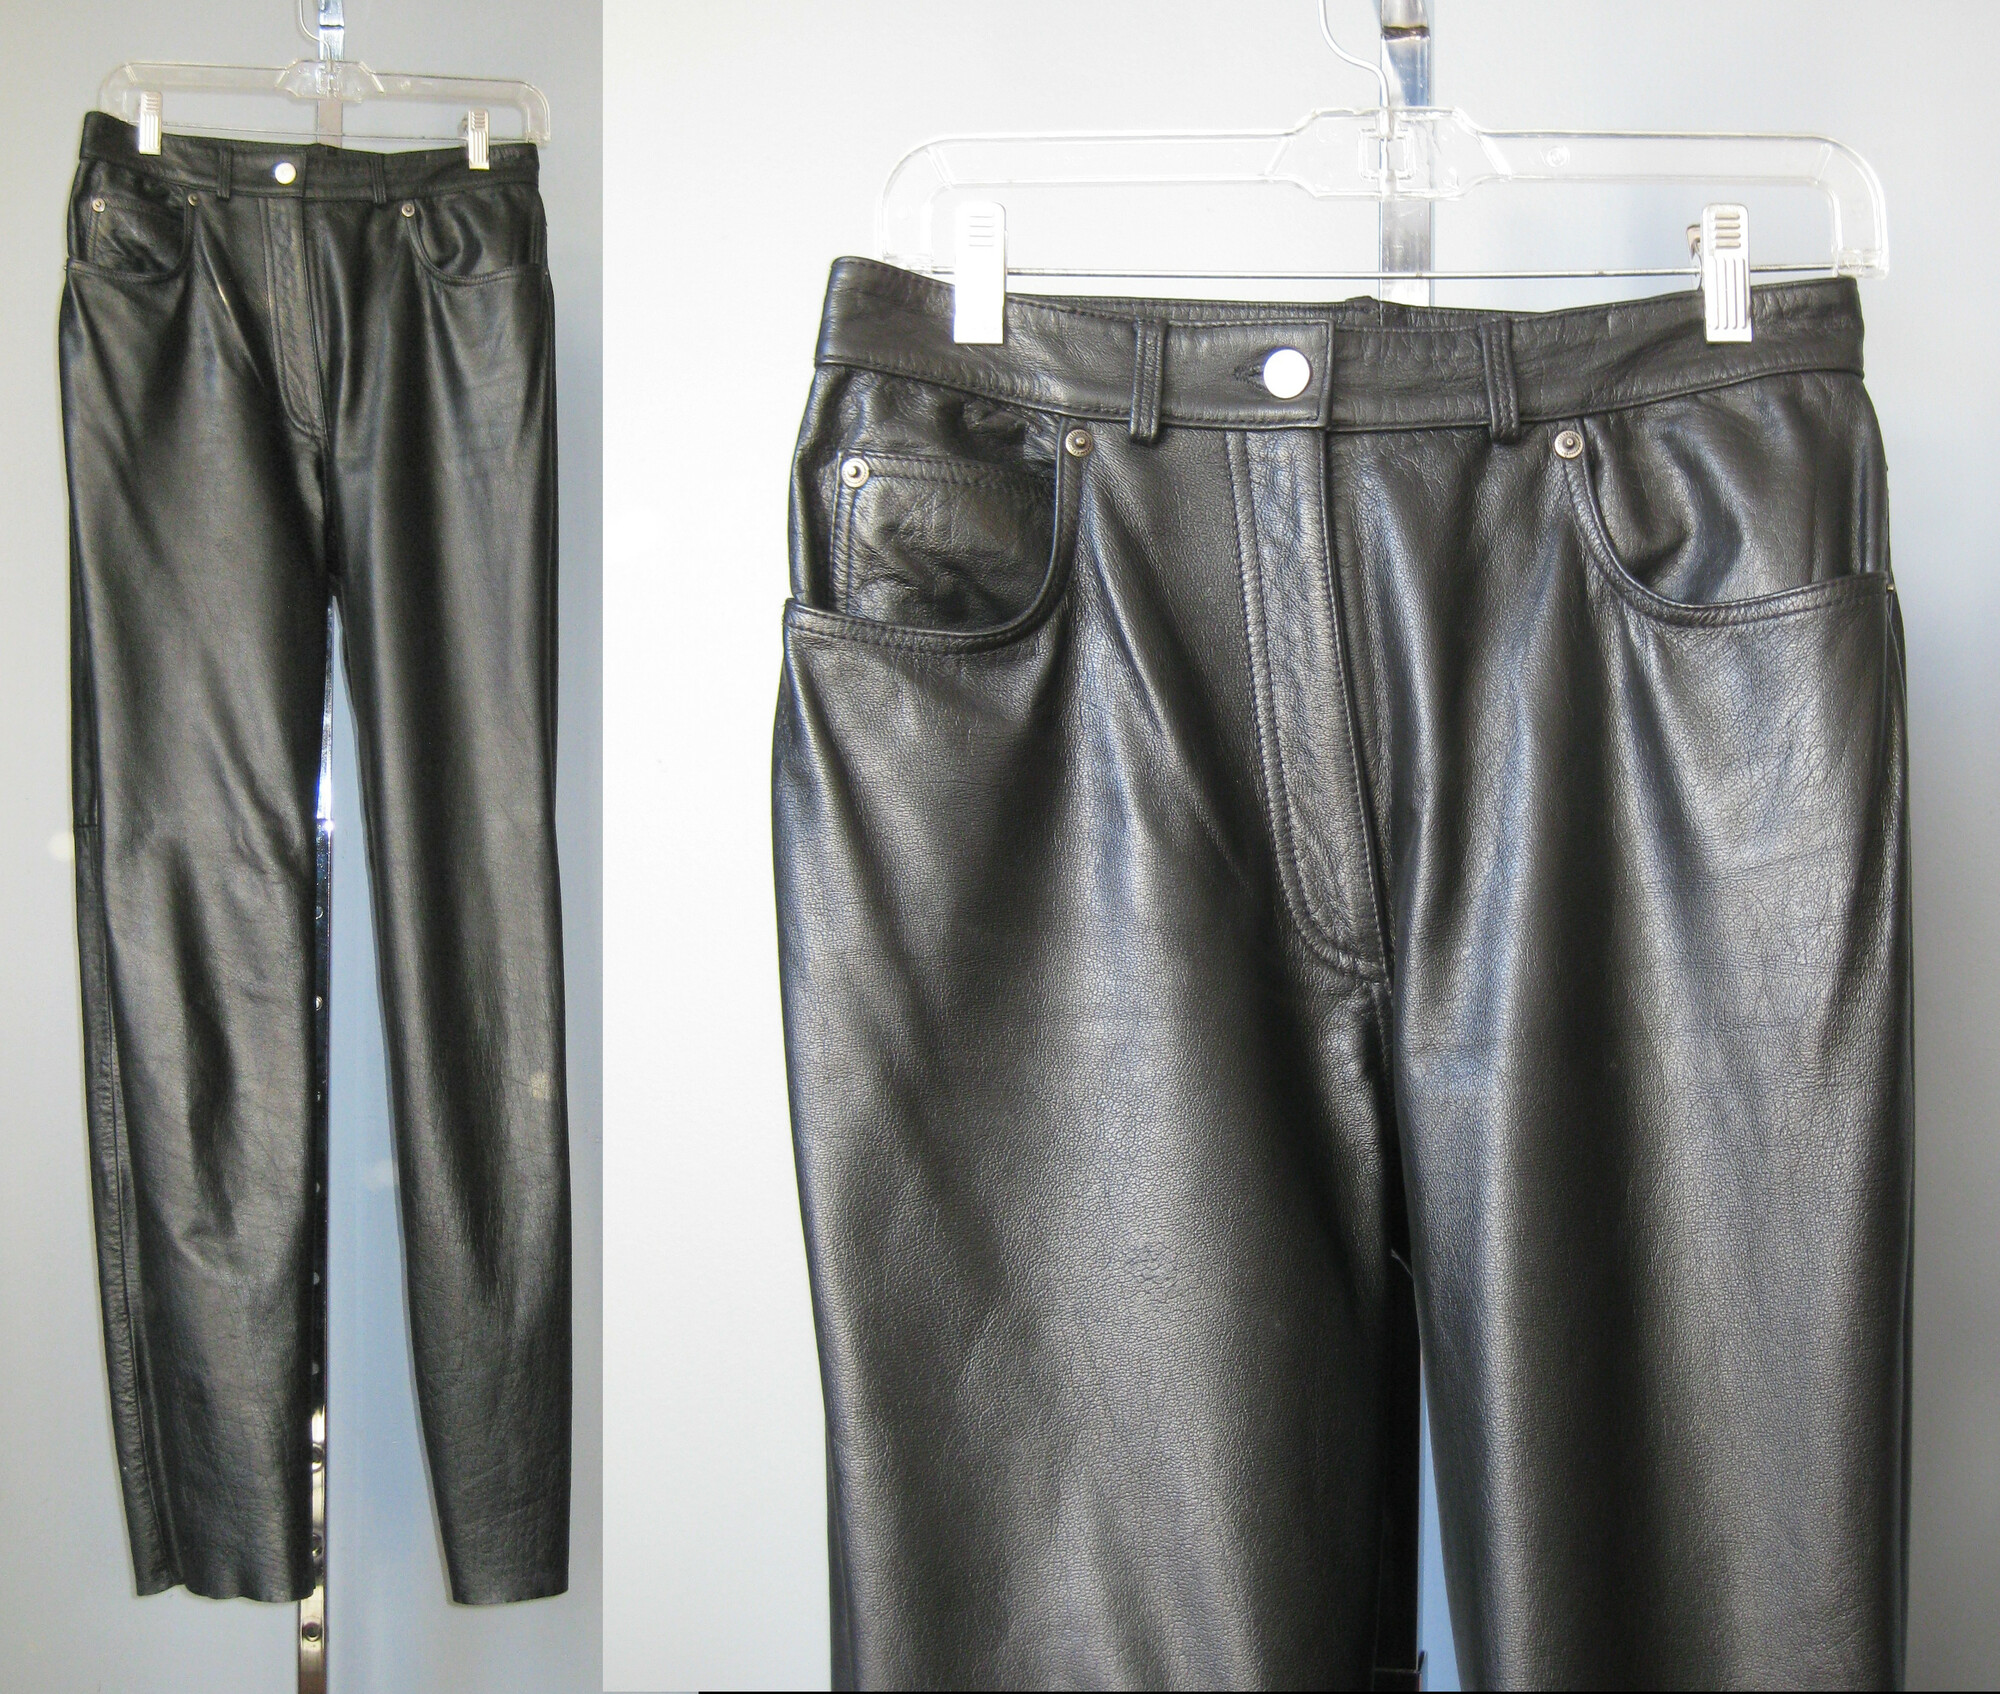 High waisted and high quality leather jeans by
 FMC

High quality soft leather,
Fully lined to the mid calf
Regular 5 pockets jeans styling with button and fly front
Unfinished hem (as per usual with leather pants)

Black
Marked size 10 but def. WILL NOT FIT A MODERN SIZE 10 woman.  Better for a size 6 oir possibly 8
Here are the flat measurements. Please double where appropriate:

Waist: 14.5
Hip: 20 3/4
Rise: 11 3/4
Inseam: 32.5
Side seam: 43.5

Perfect condition!


Thanks for looking!
#44709